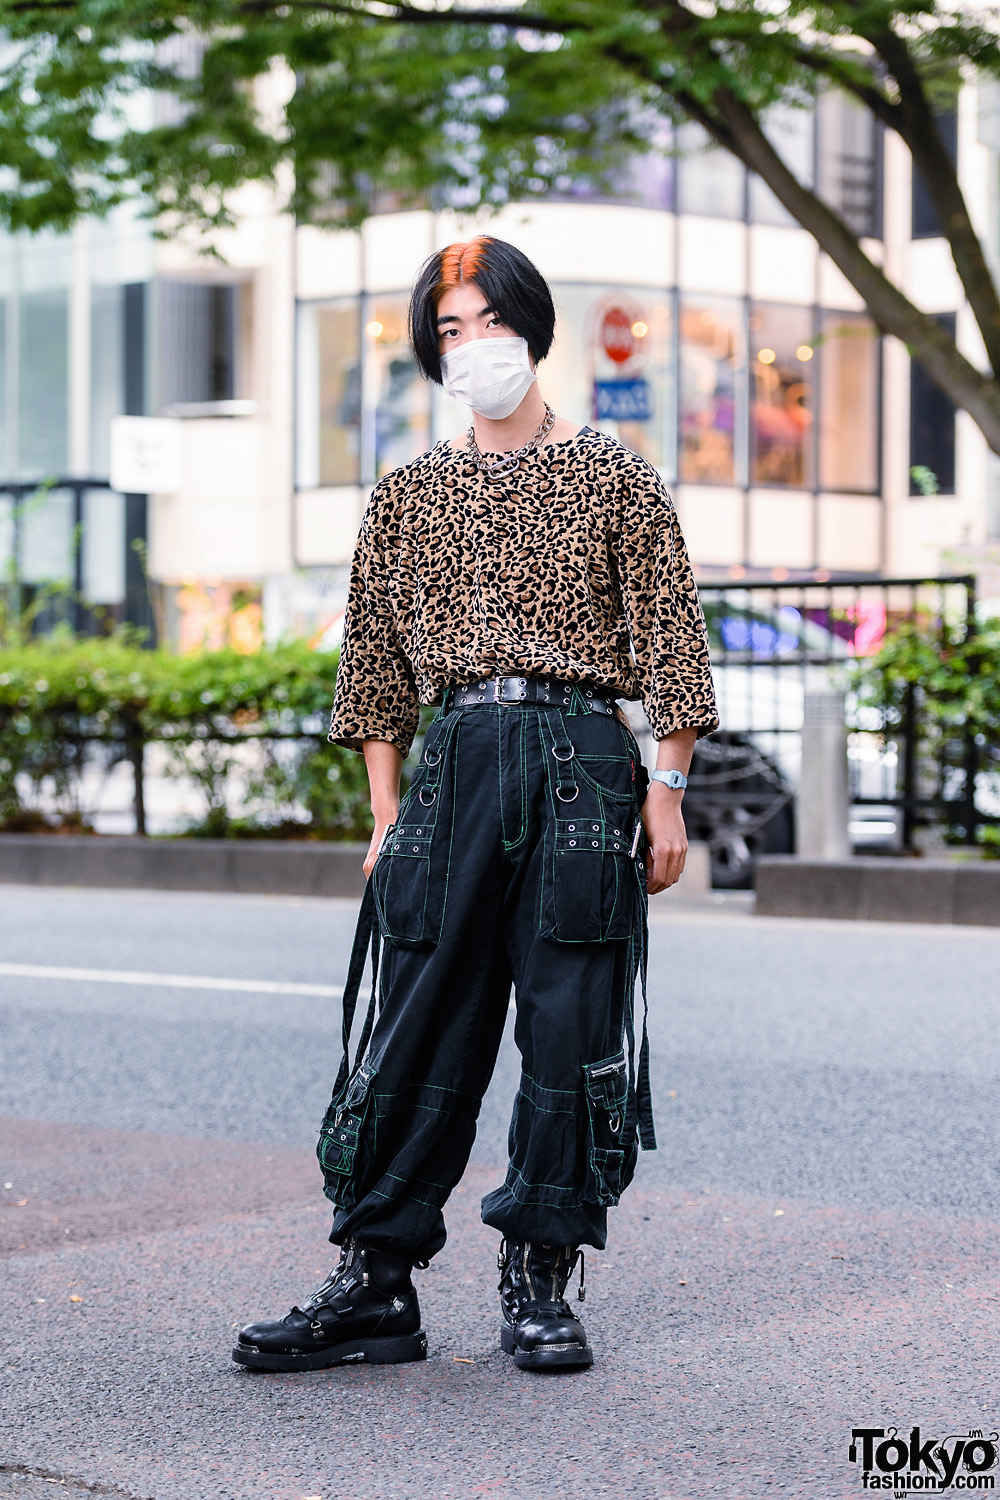 Harajuku Guy's Streetwear Style w/ Face Mask, Chain Necklace, Vintage Leopard Shirt, Tripp NYC Strap Pants & Harley Davidson Boots